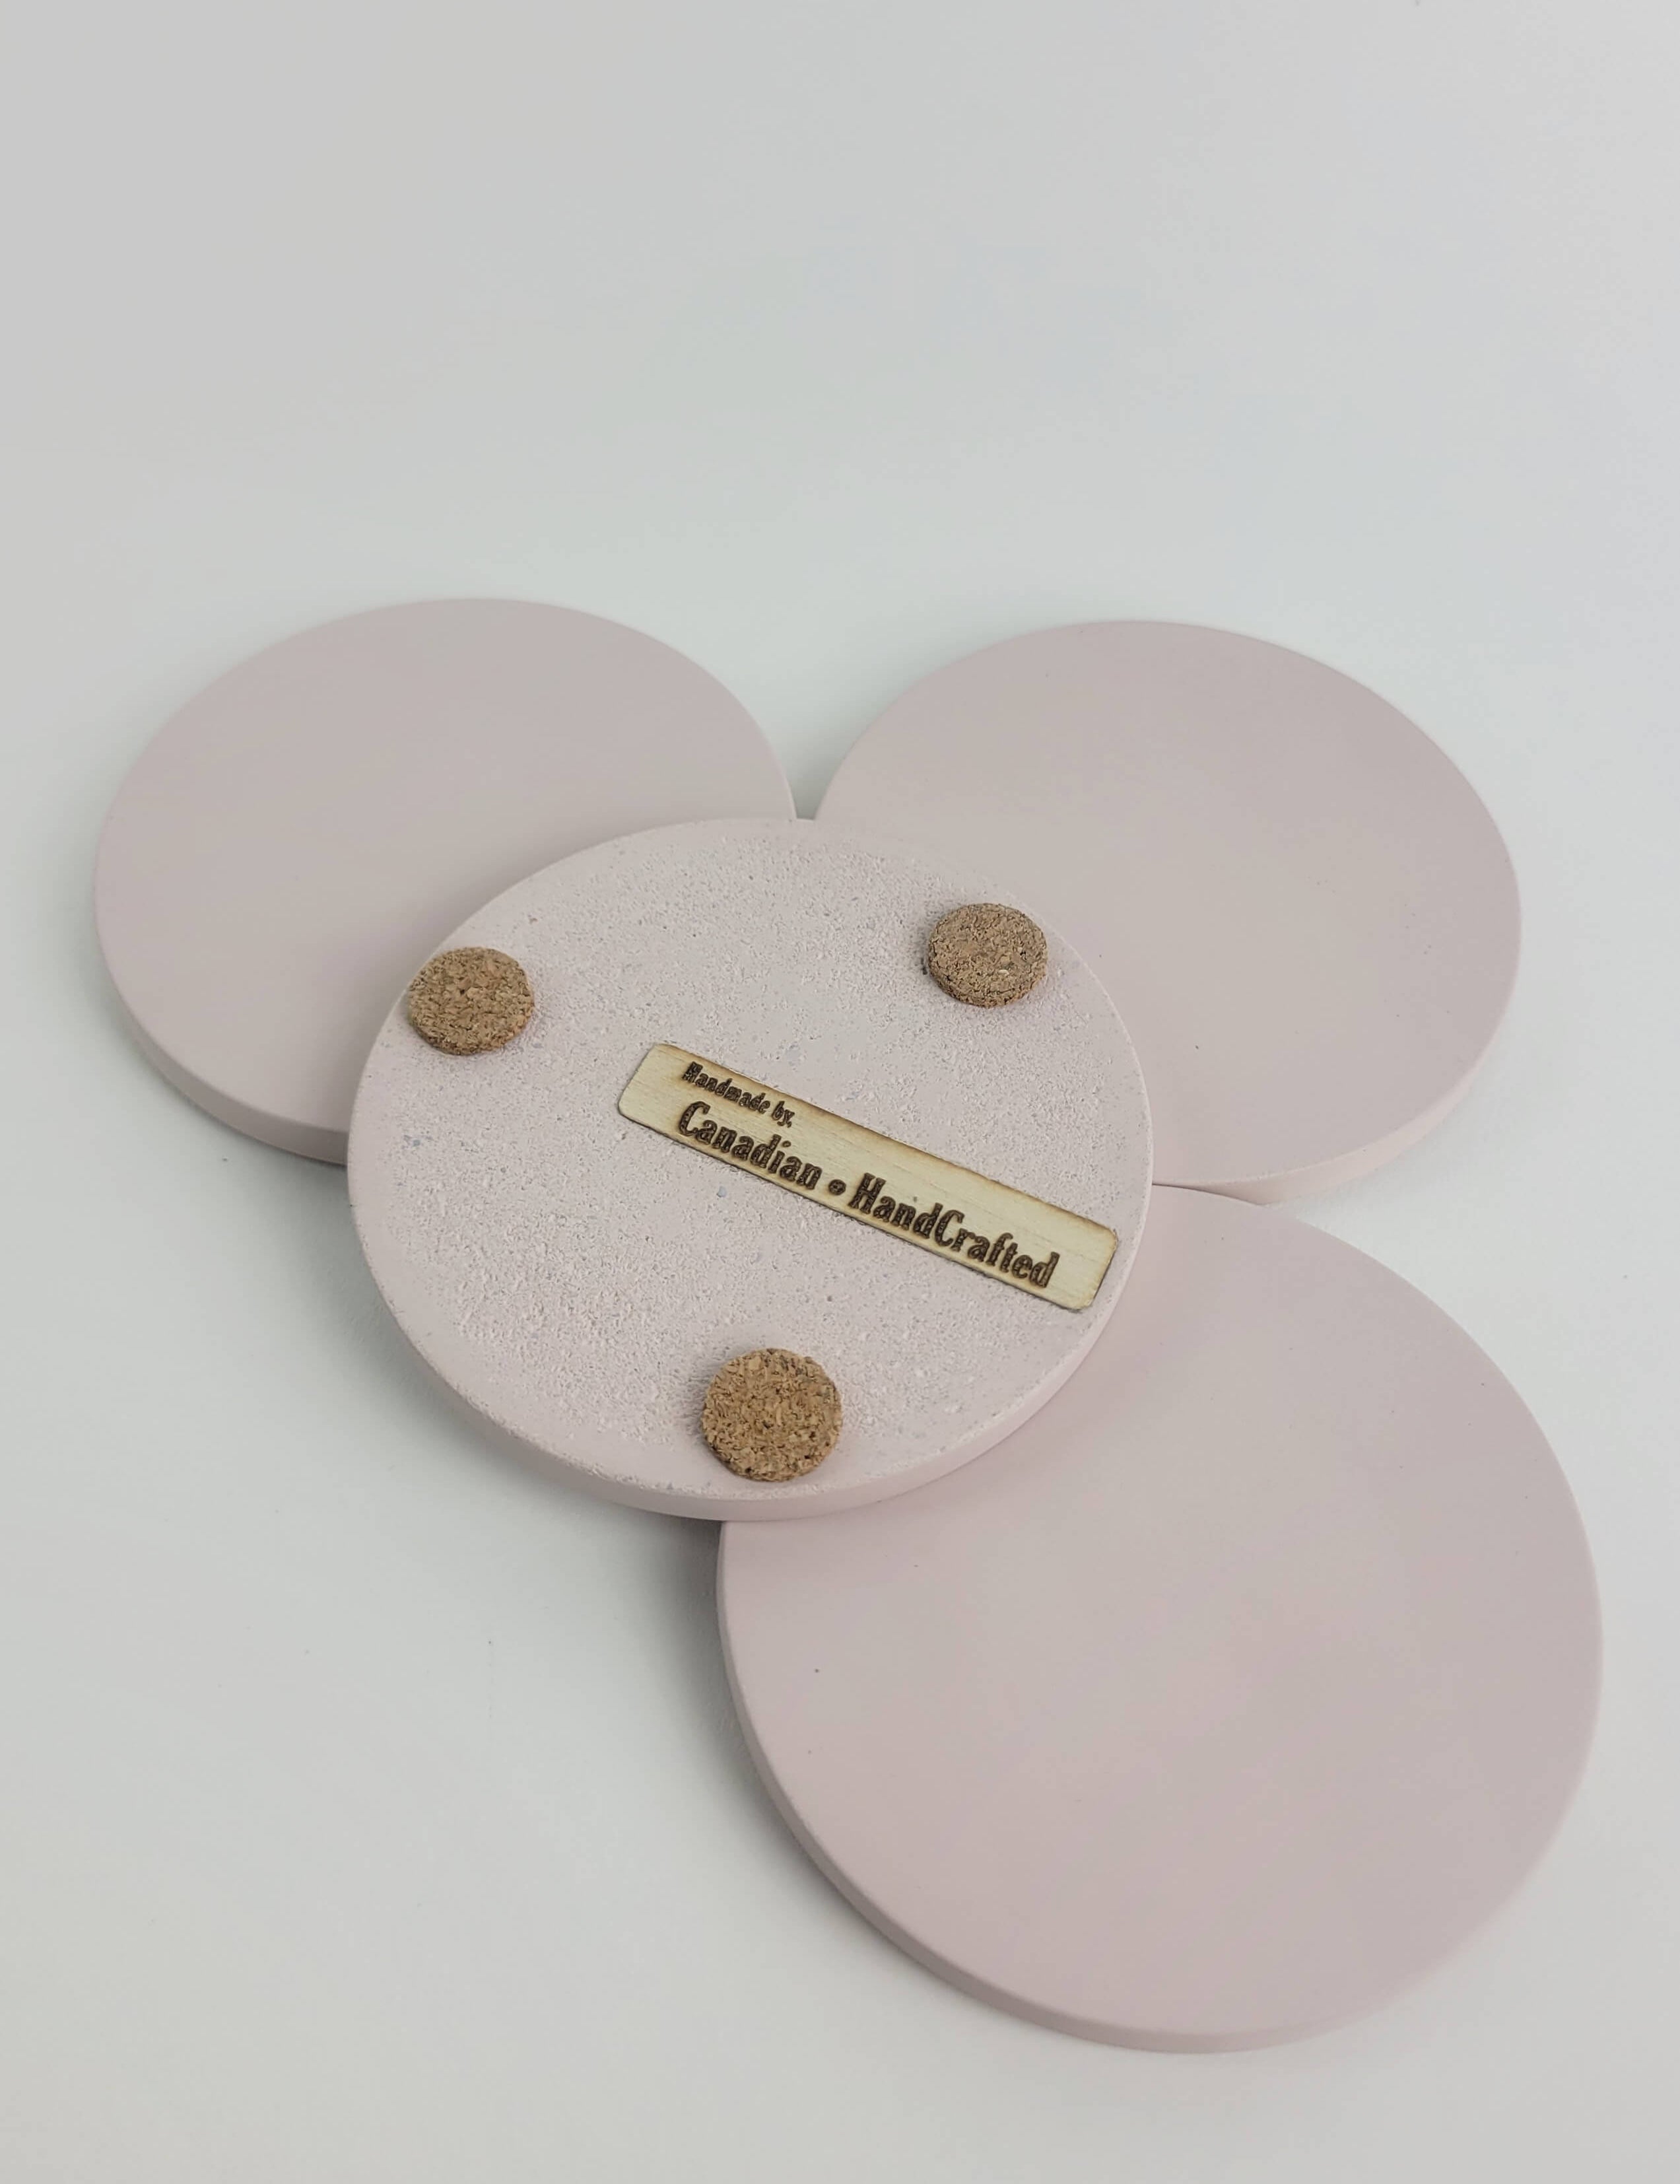 Set of 4 pastel pink concrete coasters, one flipped to reveal the underside featuring 3 cork bumpers and an engraved wooden veneer with the text 'Handmade by Canadian HandCrafted'.